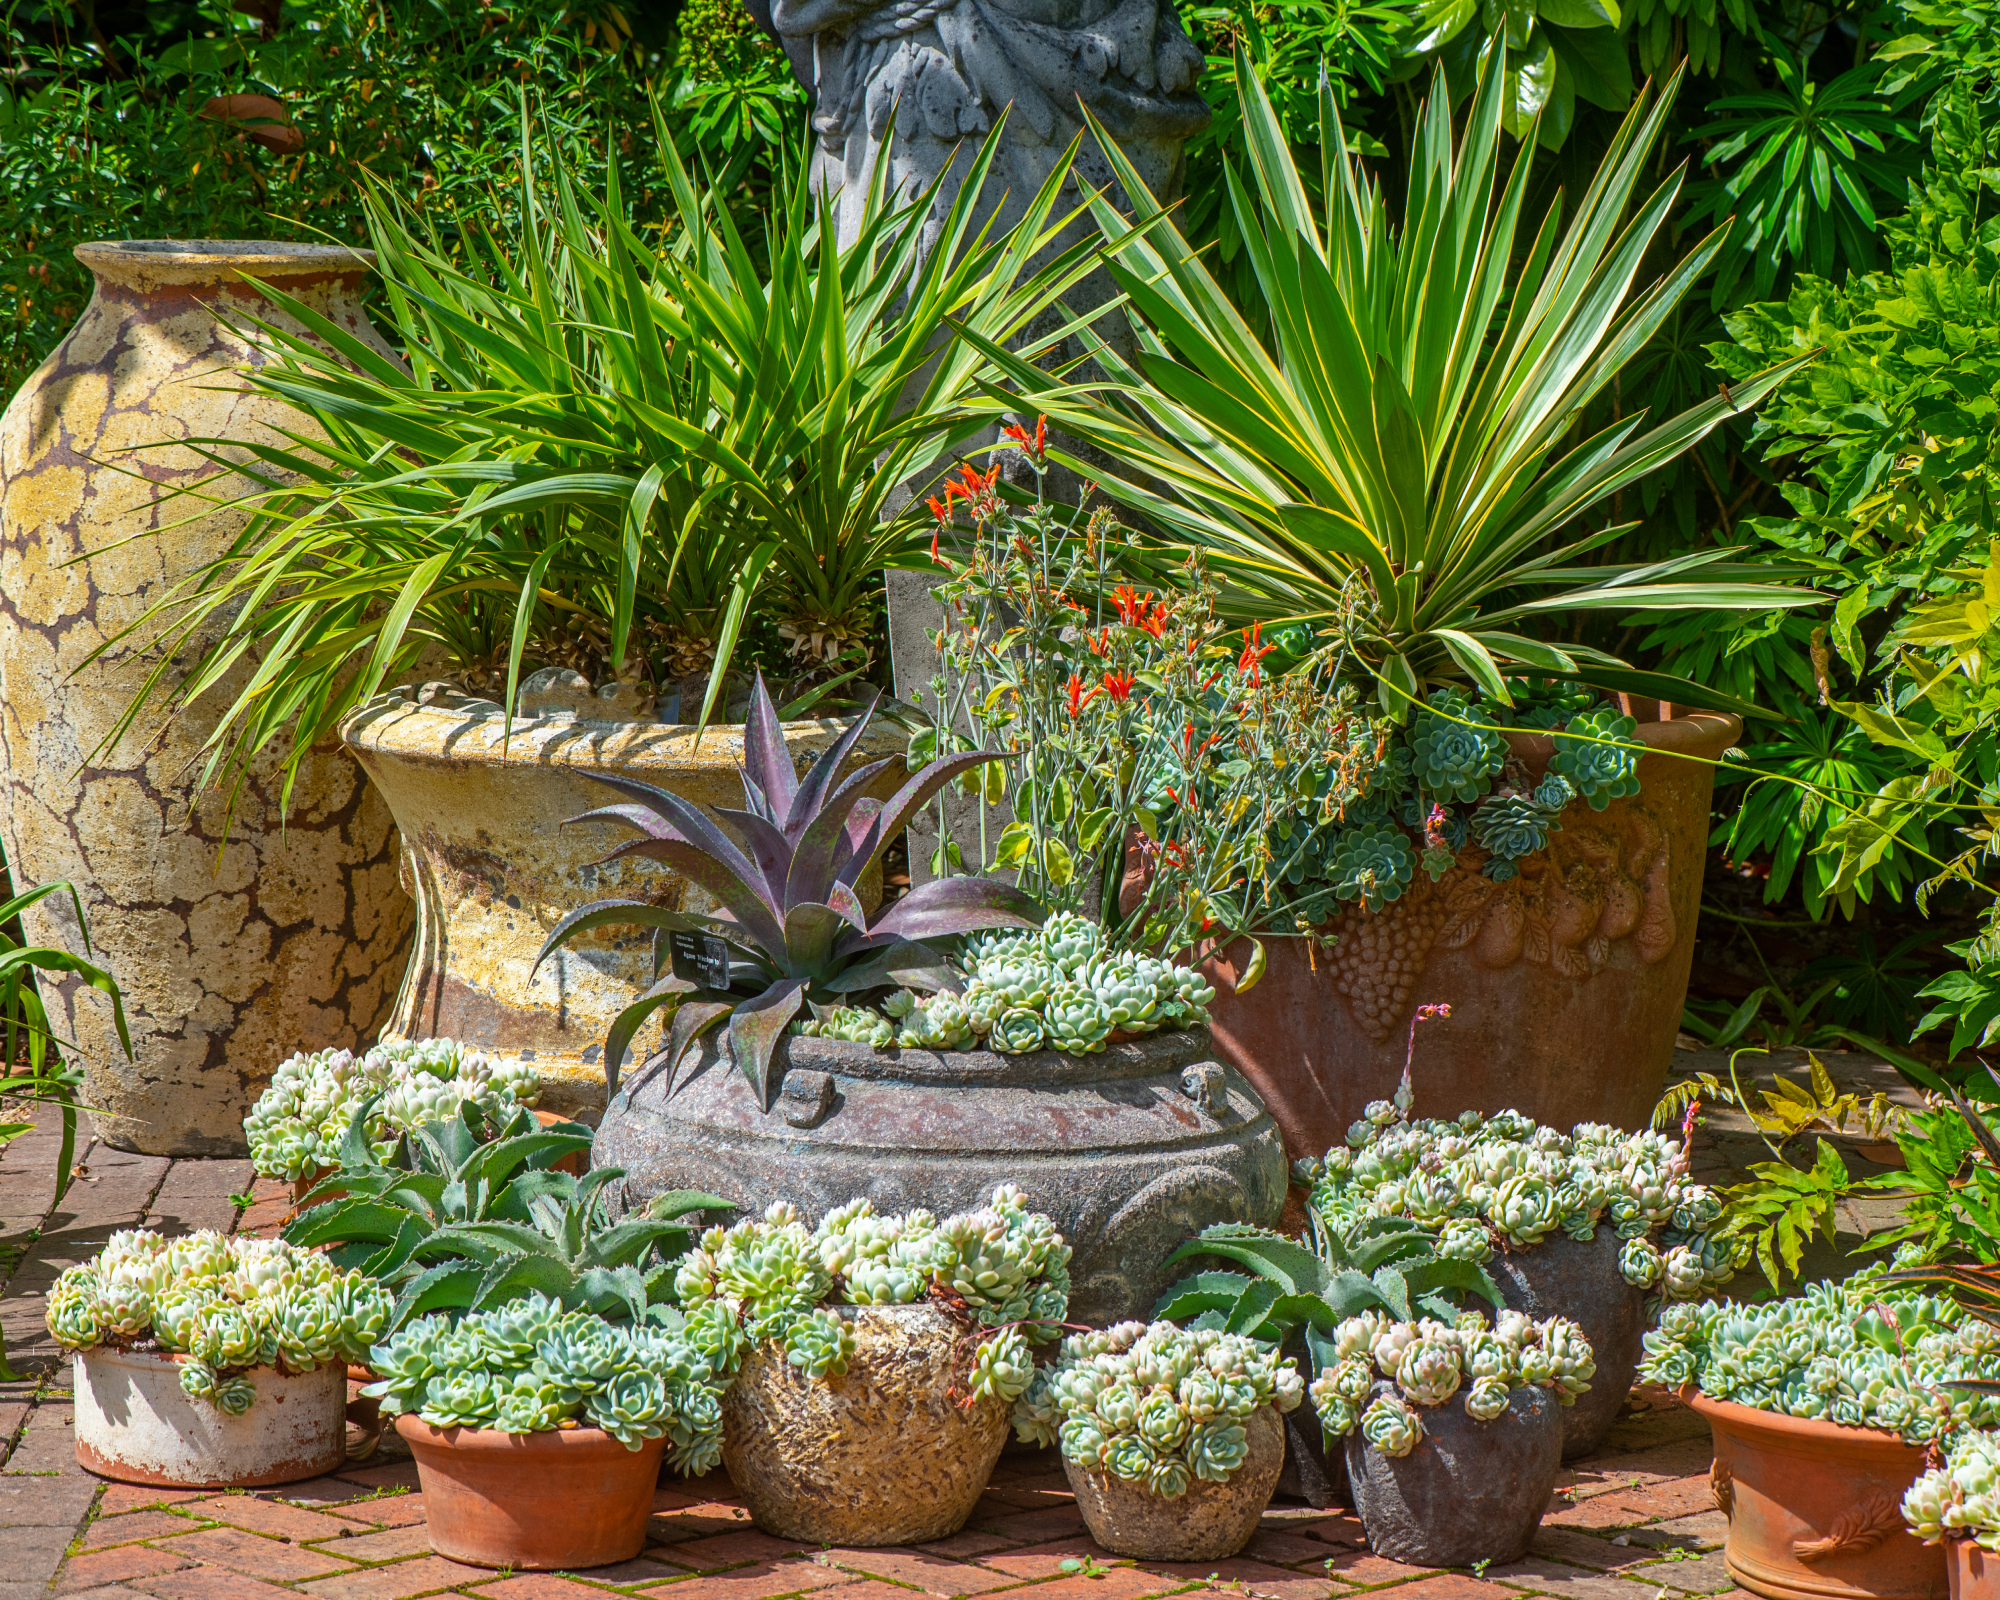 Succulents in pots on an outdoor patio